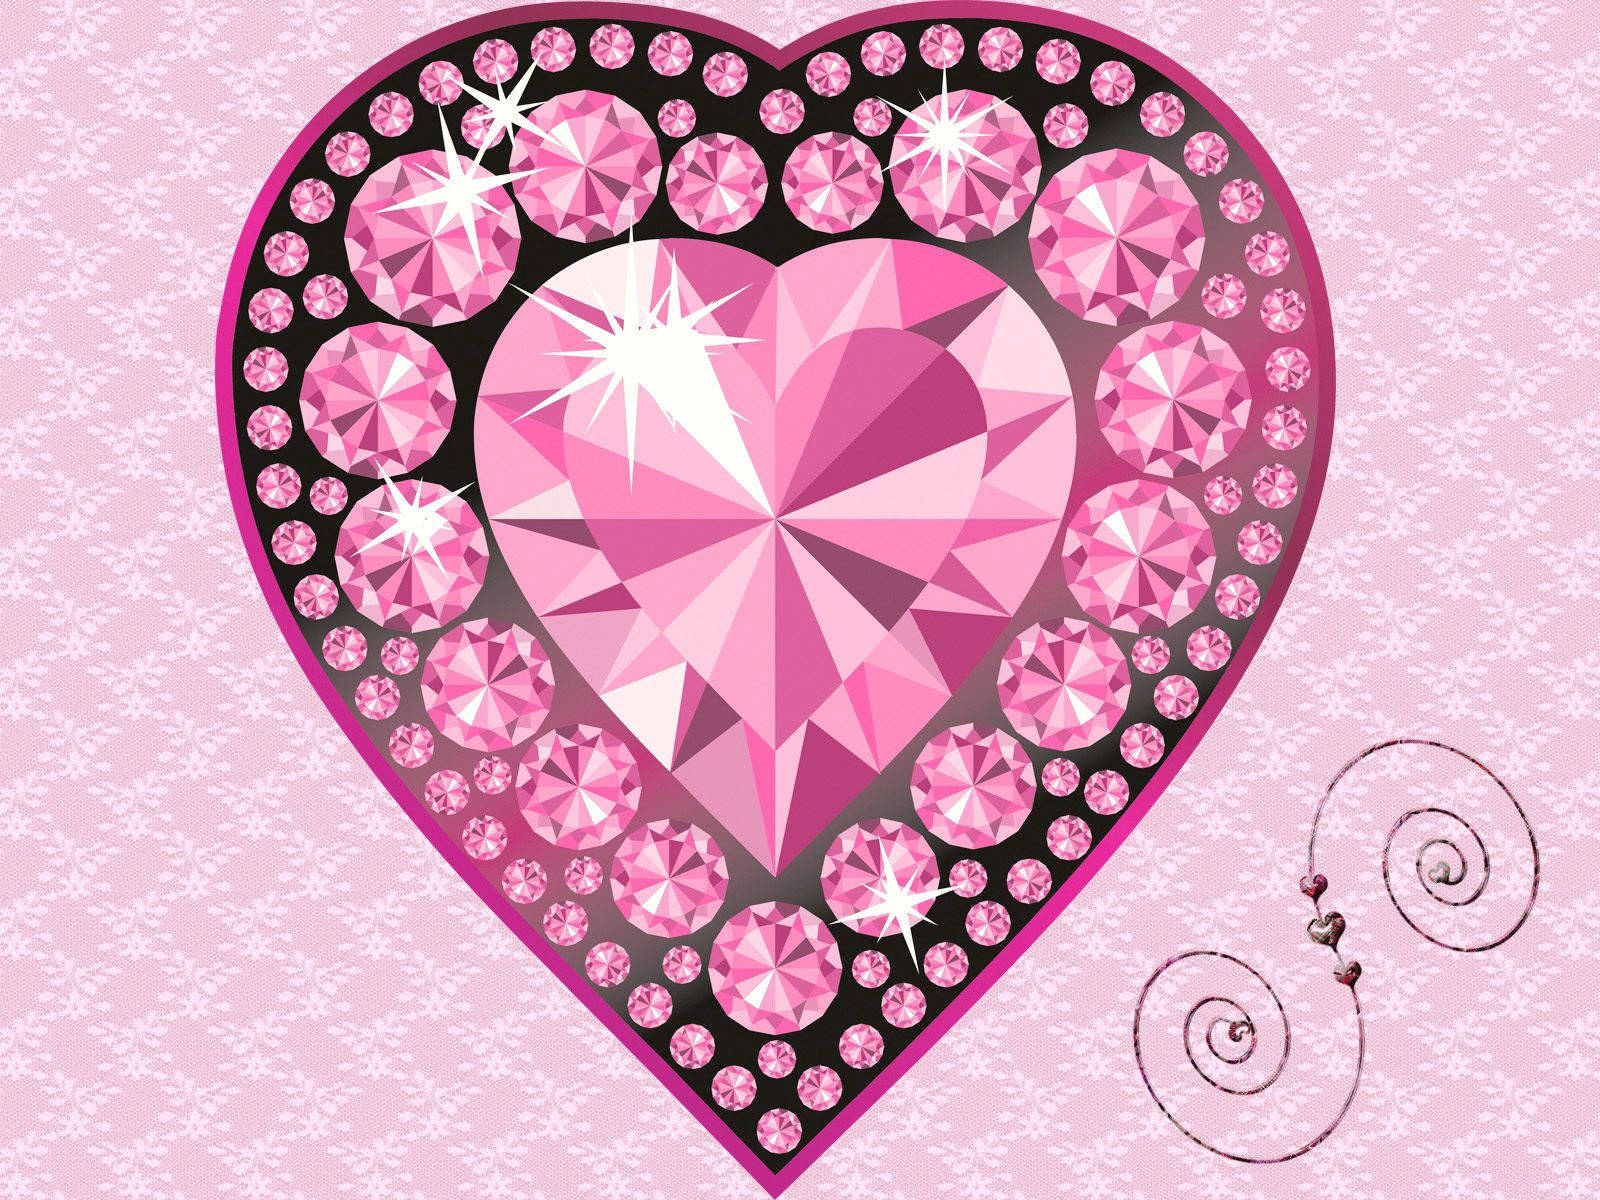 Show Your Love With a Pink Glitter Diamond Heart Wallpaper